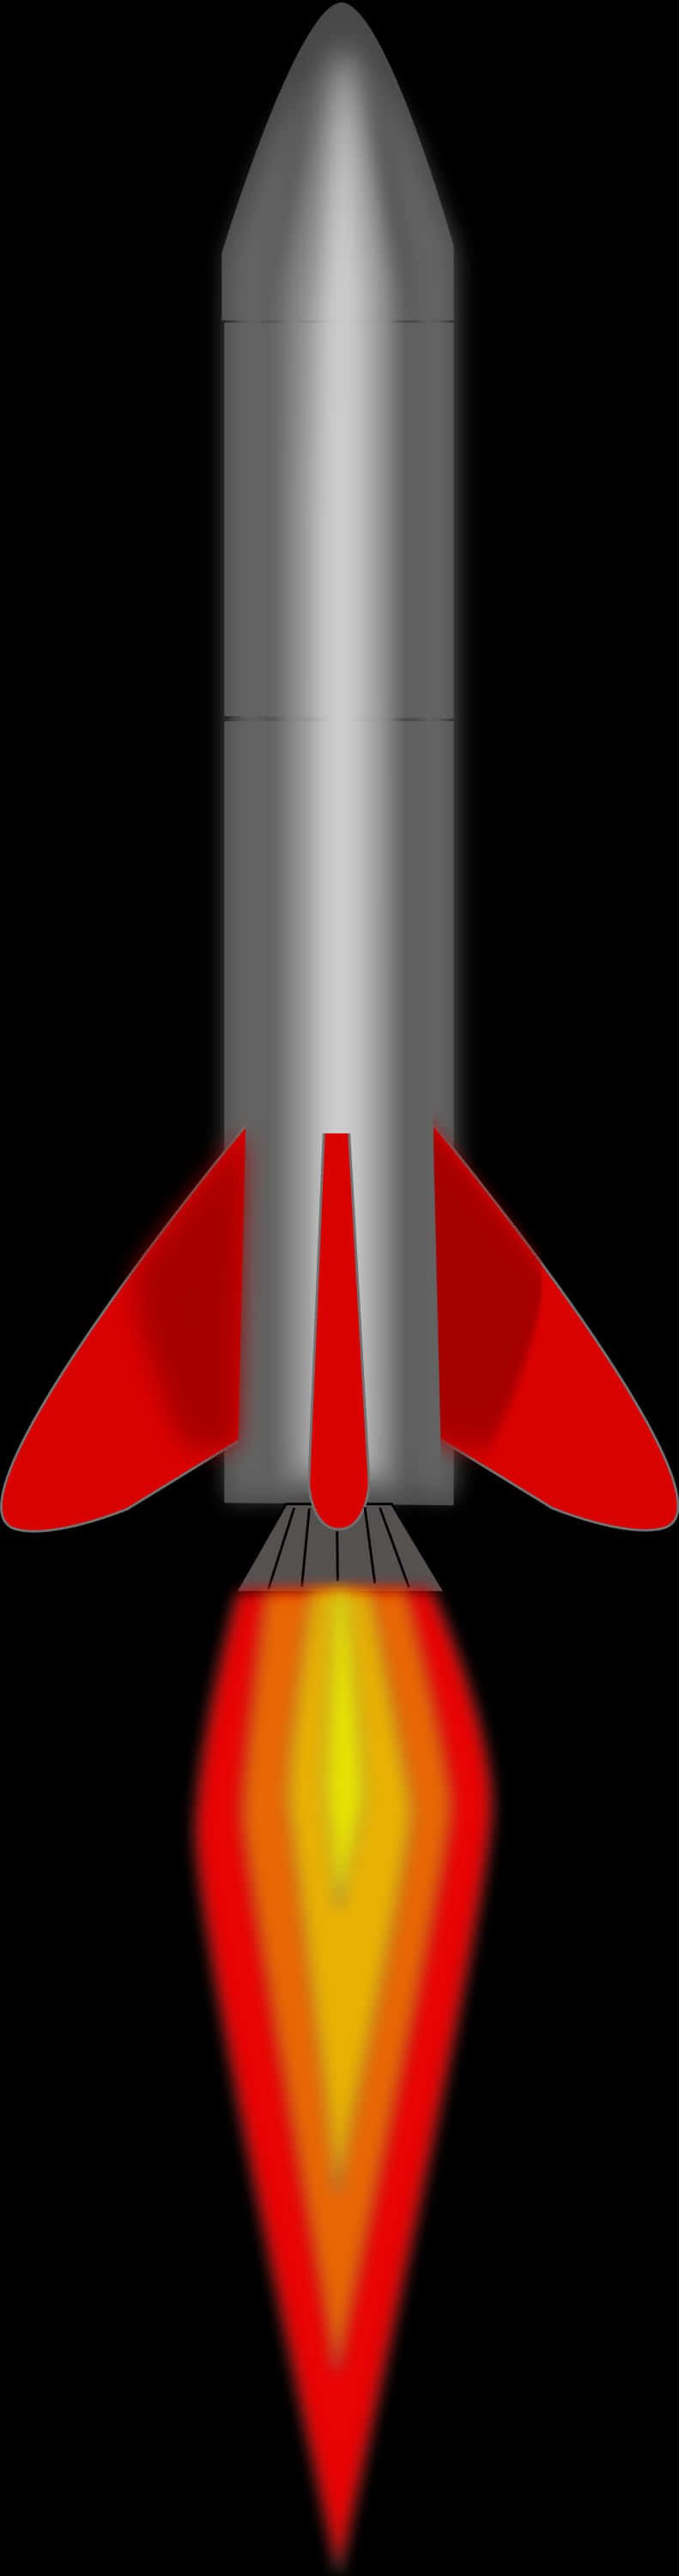 Silver Rocket Red Fins Flame Propulsion PNG